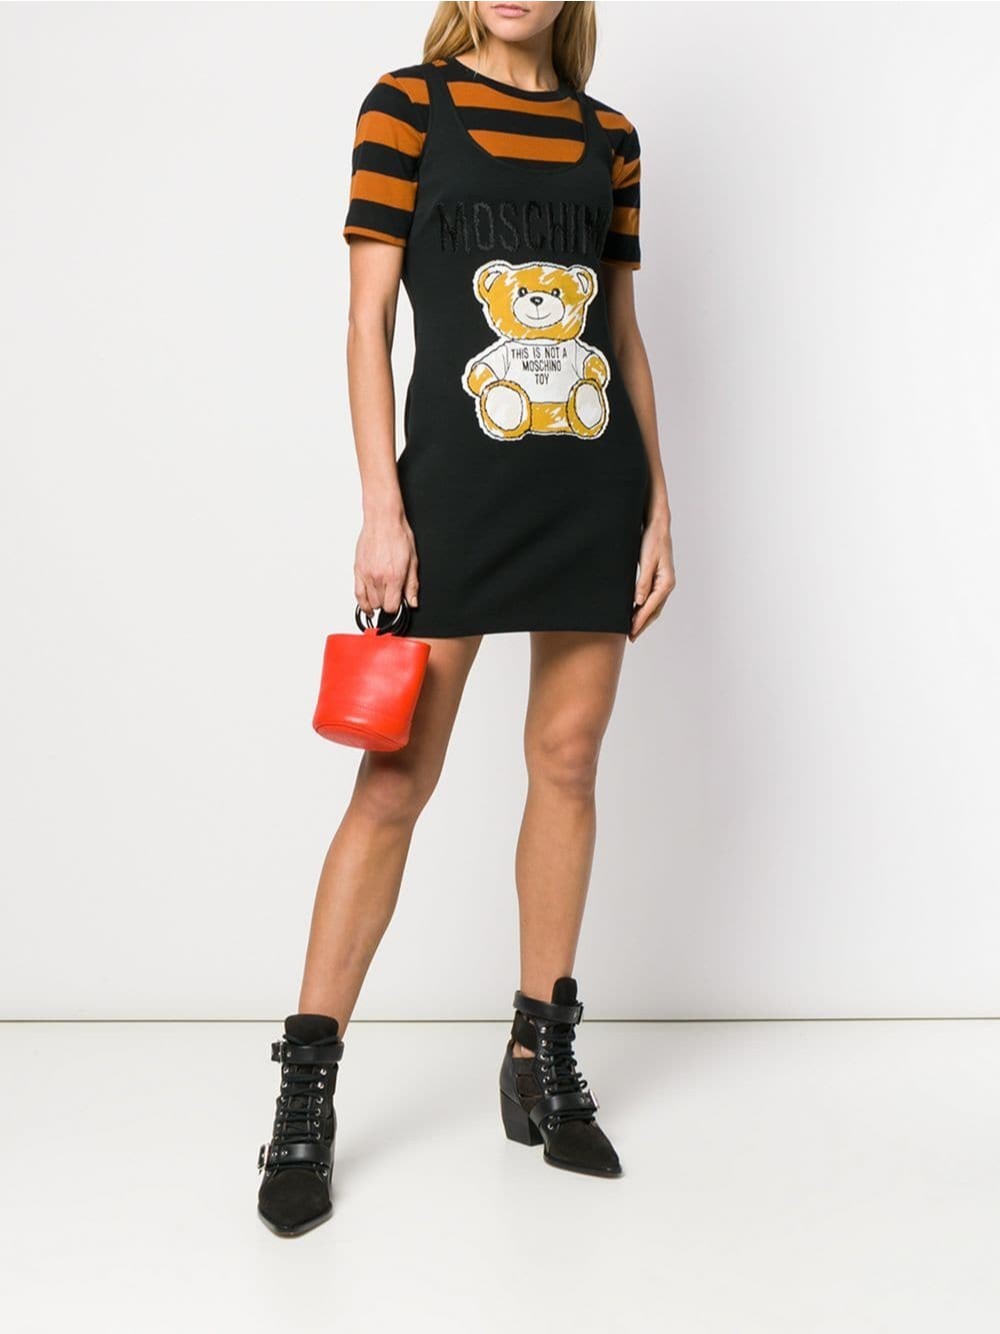 moschino TEDDY BEAR DRESS available on montiboutique.com - 28382